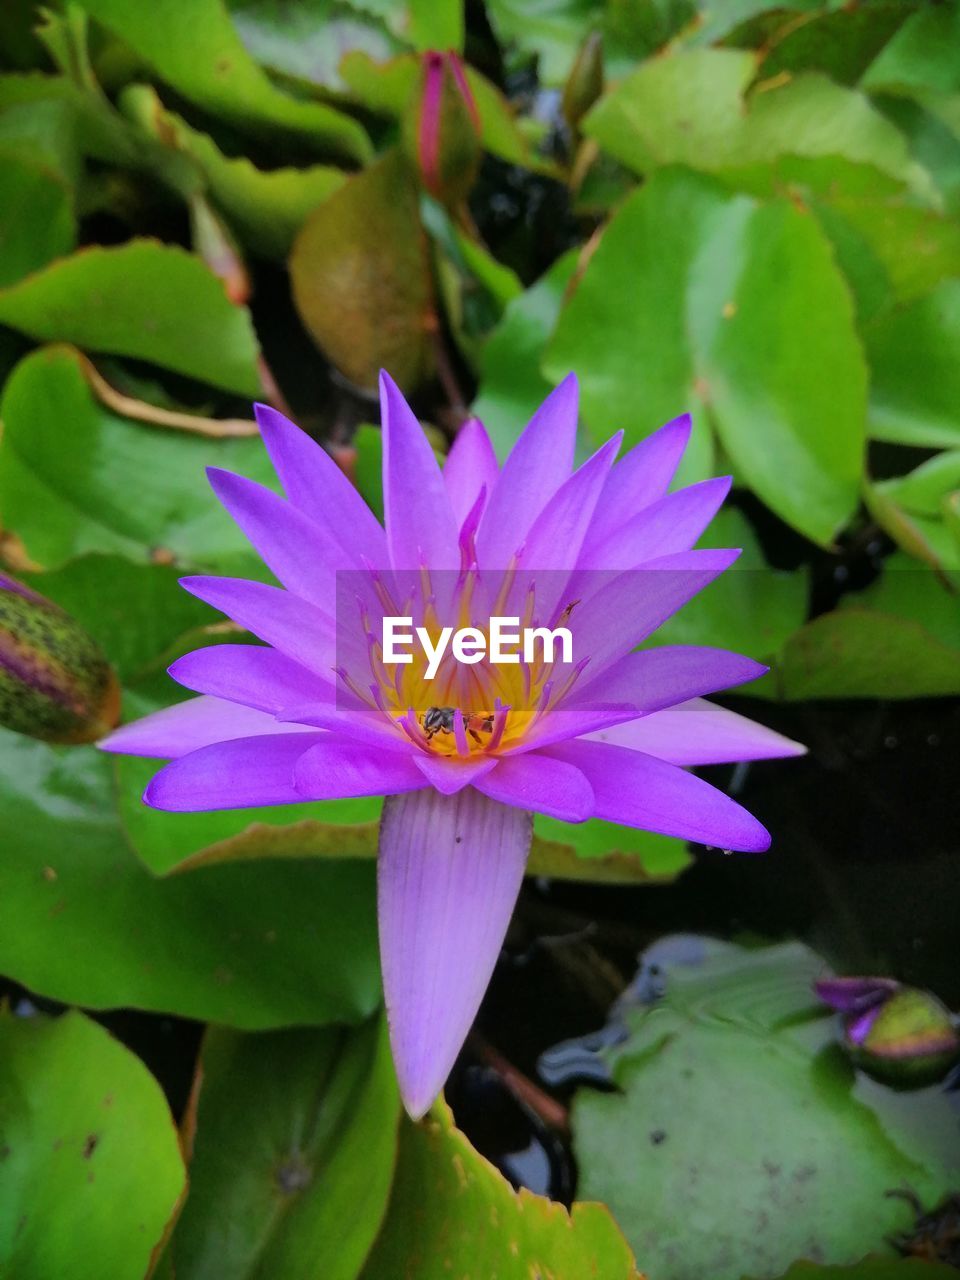 CLOSE-UP OF PINK WATER LILY IN LOTUS